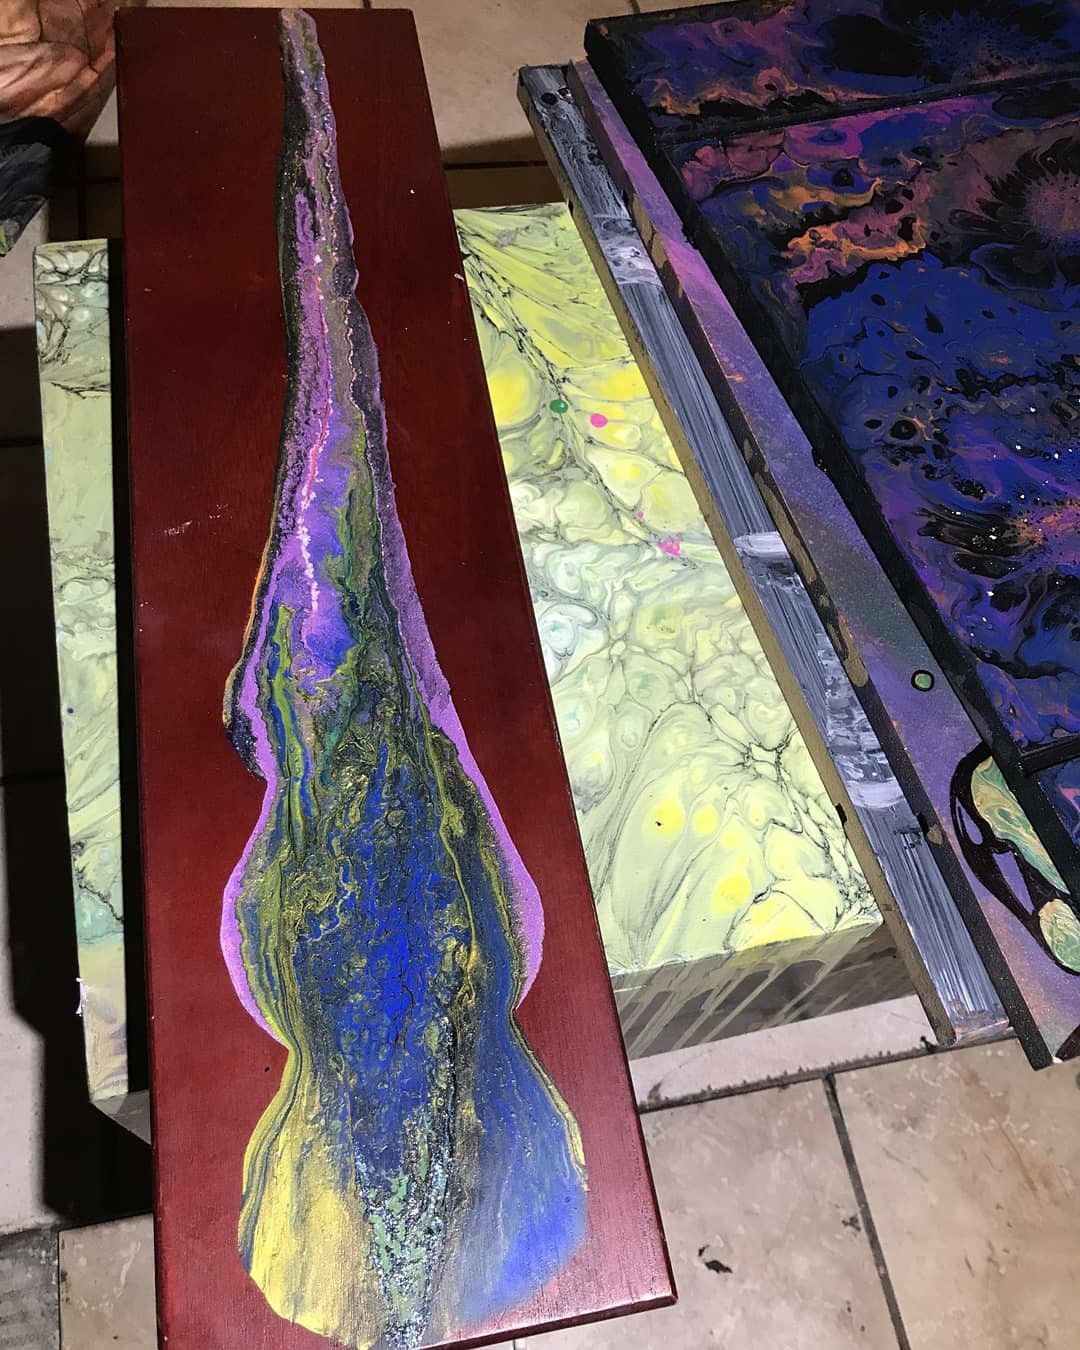 Floating shelf. Acrylic pour design on top